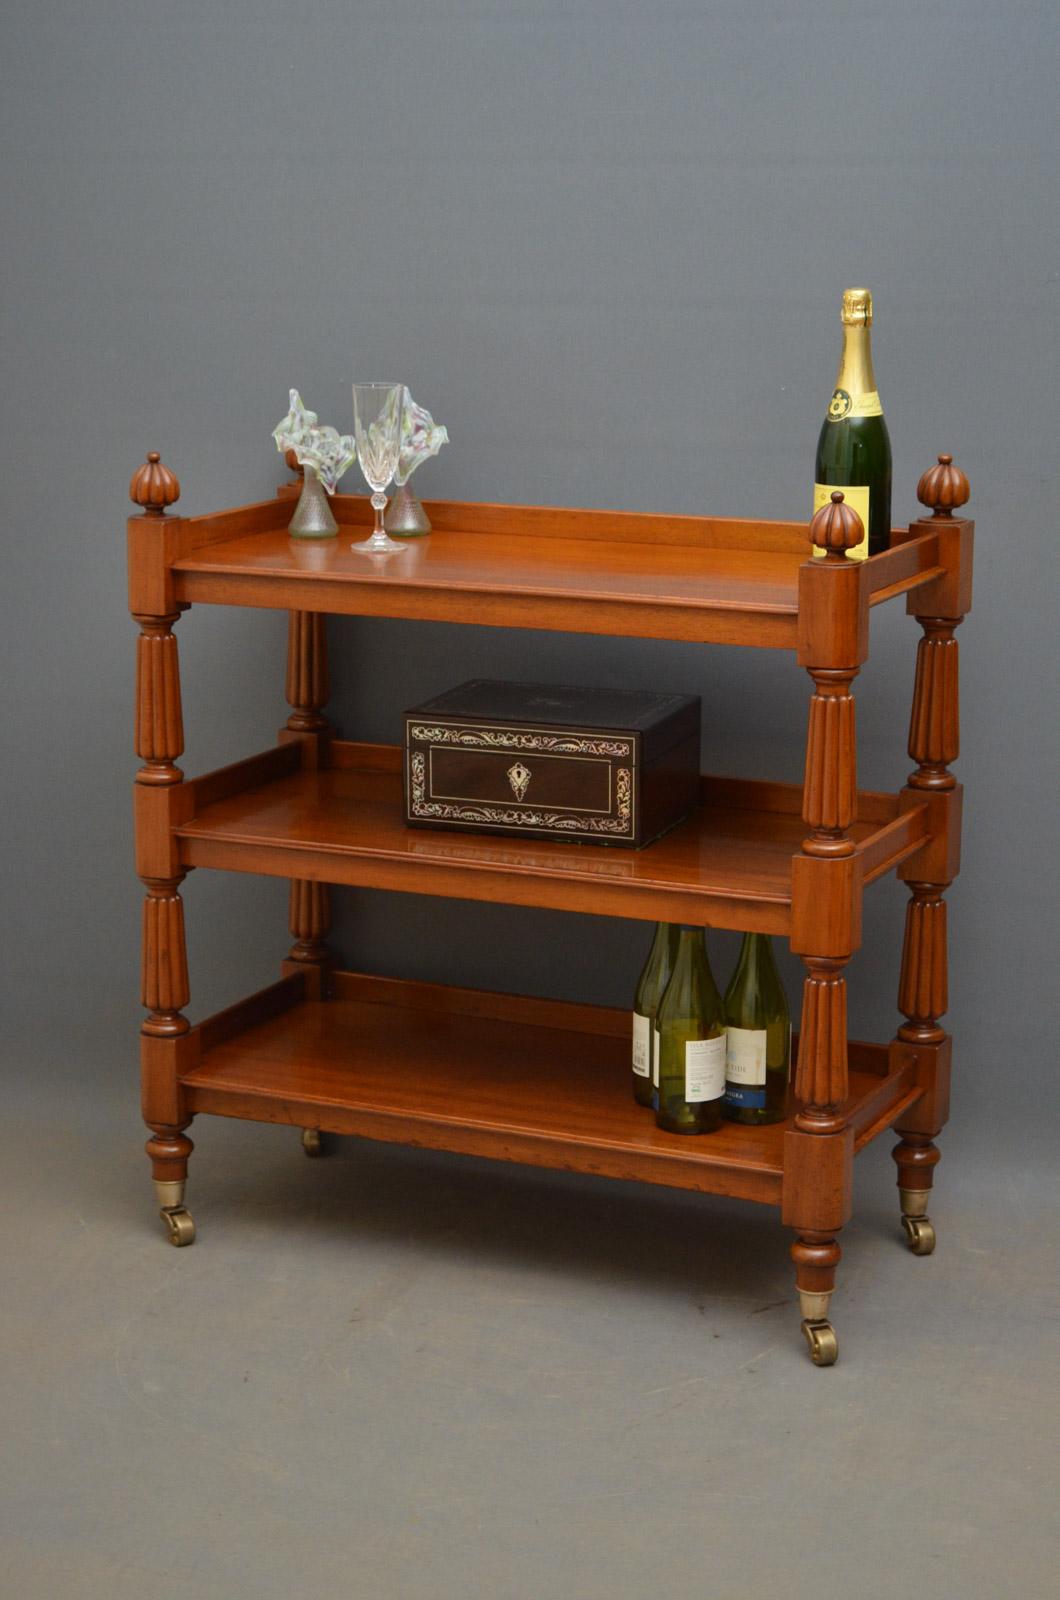 Sn3972 fine quality and very elegant Victorian, figured mahogany three-tier stand / dumbwaiter, having raised gallery to each shelf and turned and reeded supports with finials to top. This attractive étagère would make a good hi fi stand, all in